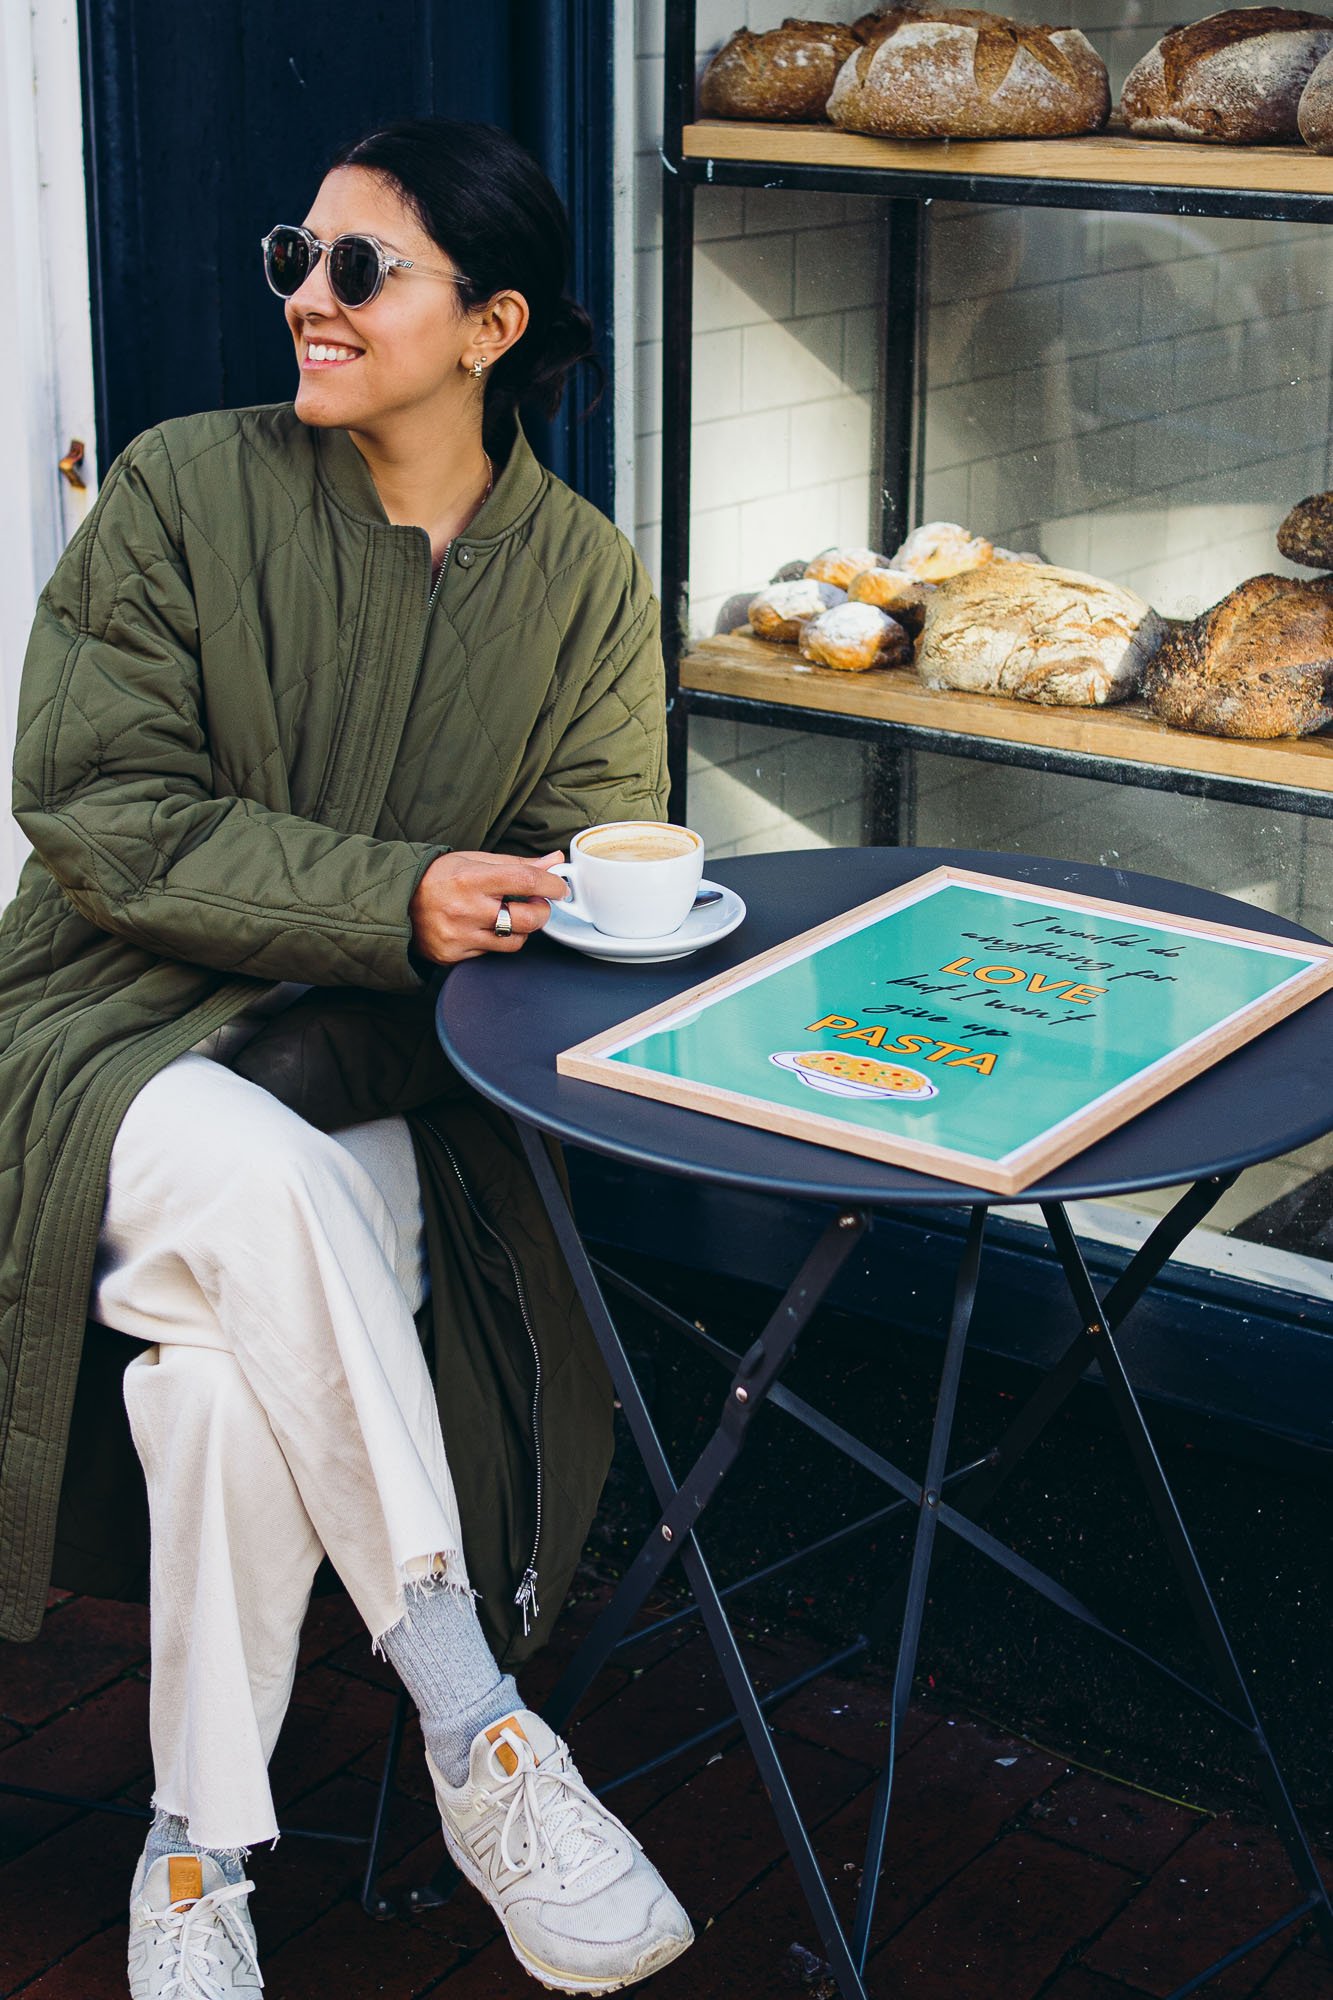 brighton-portrait-photographer-female-brand-photography-sussex-hove-worthing-lewes-coffee-drinking-business-owner-brighton-bakery-lanes.jpg